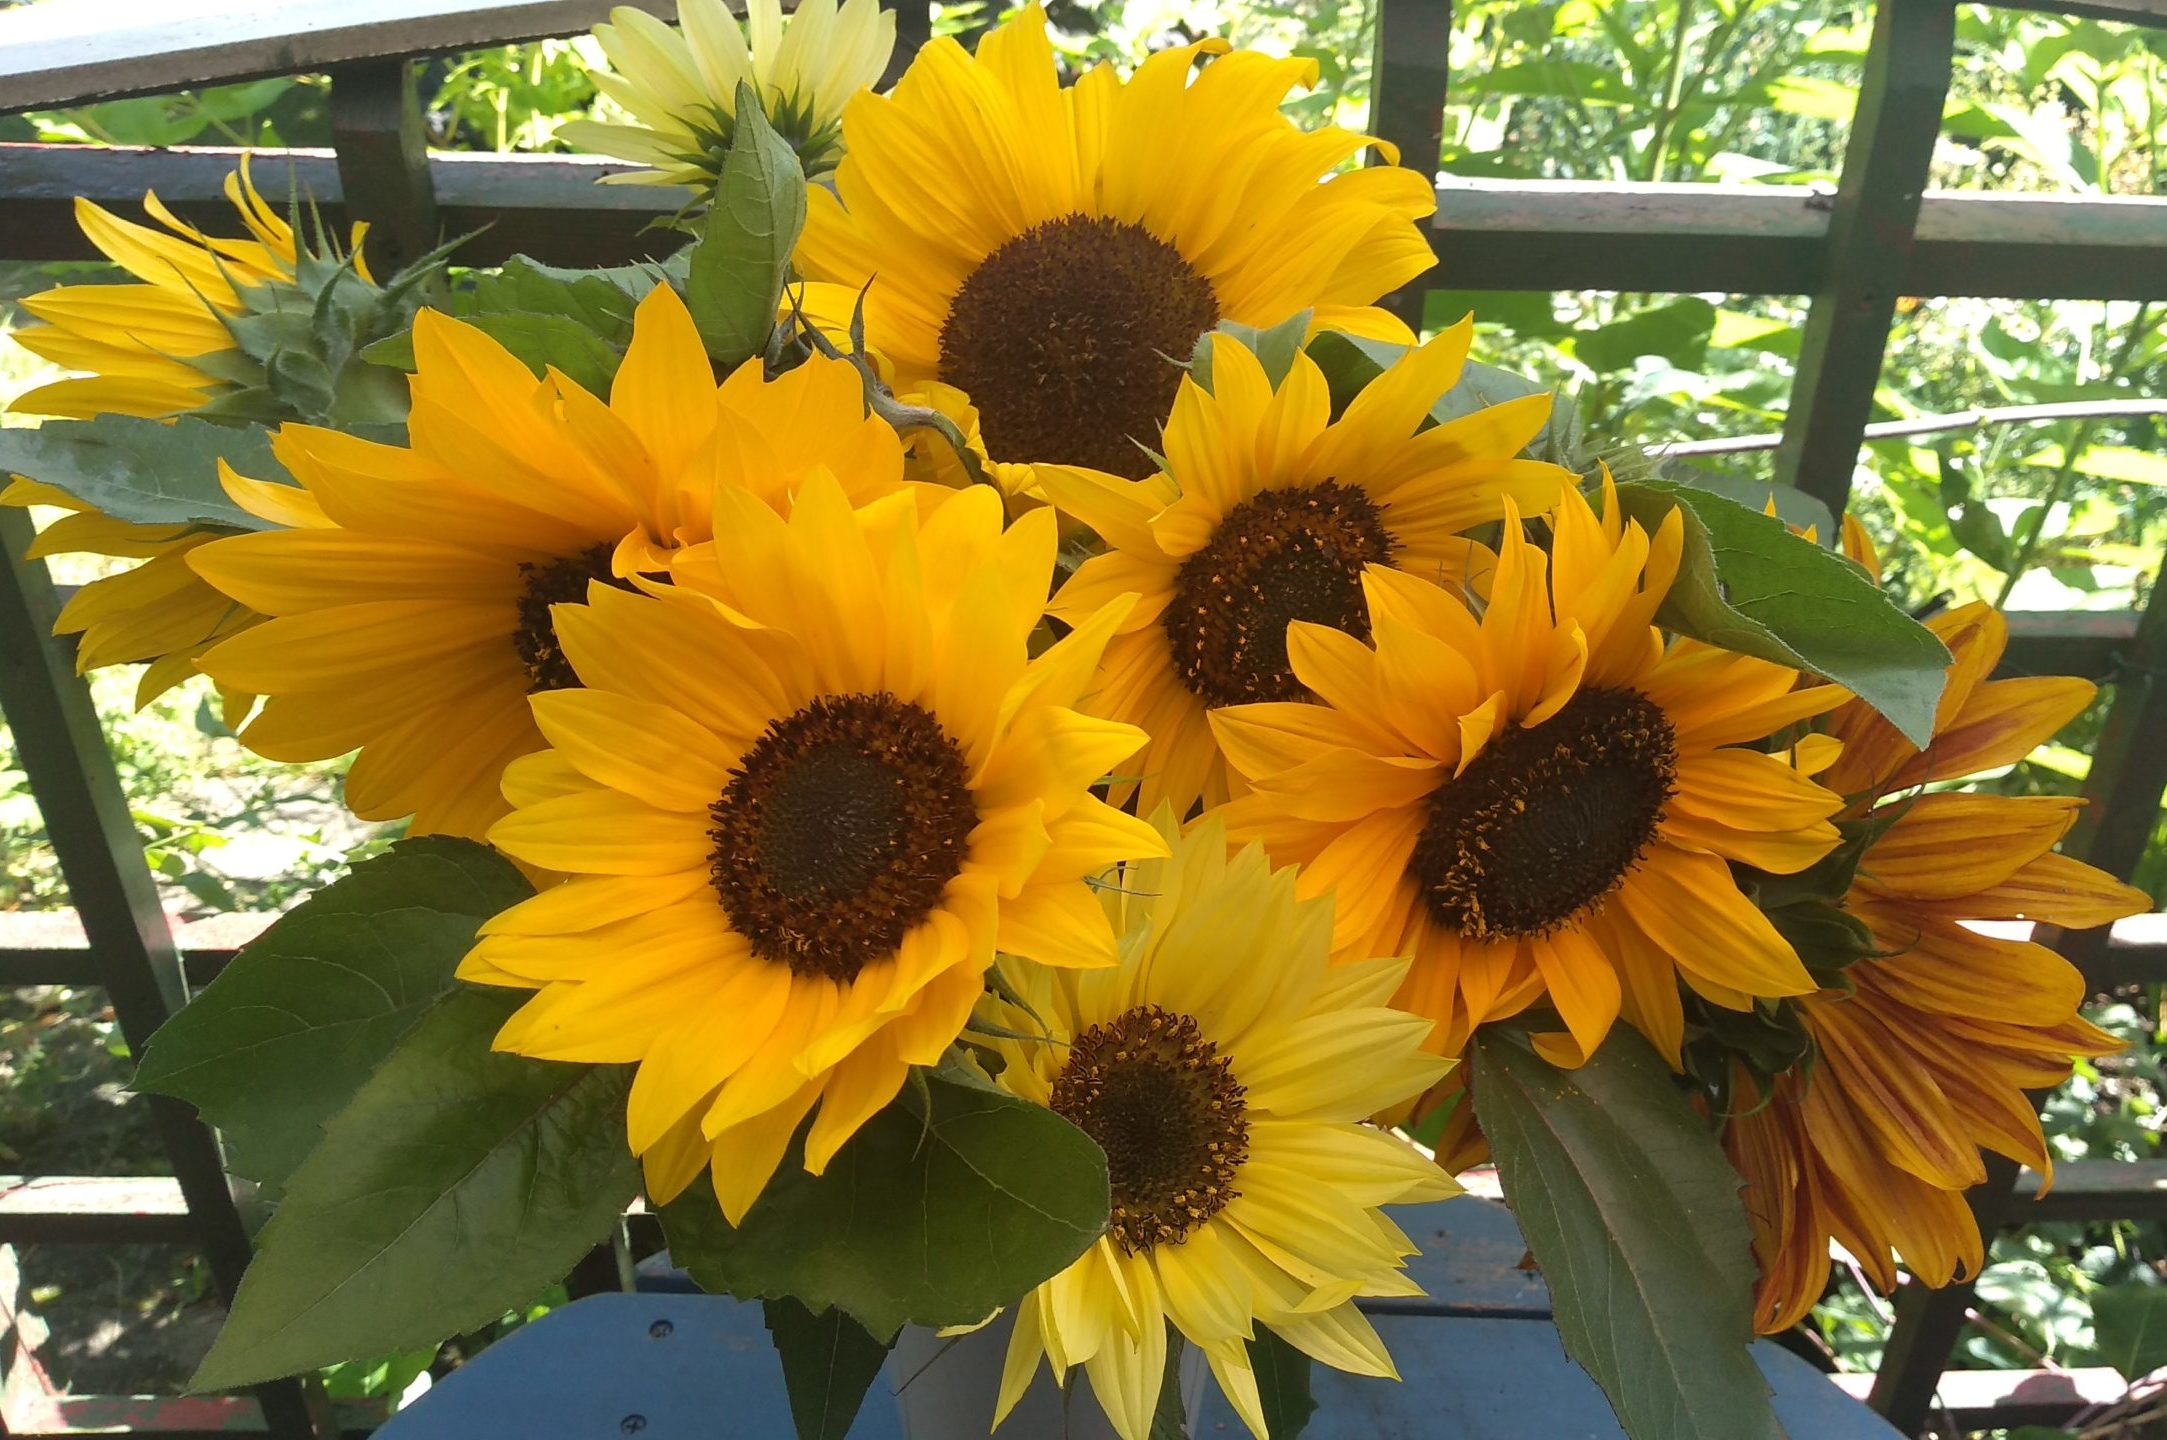 Sunflowers for cut flowers.